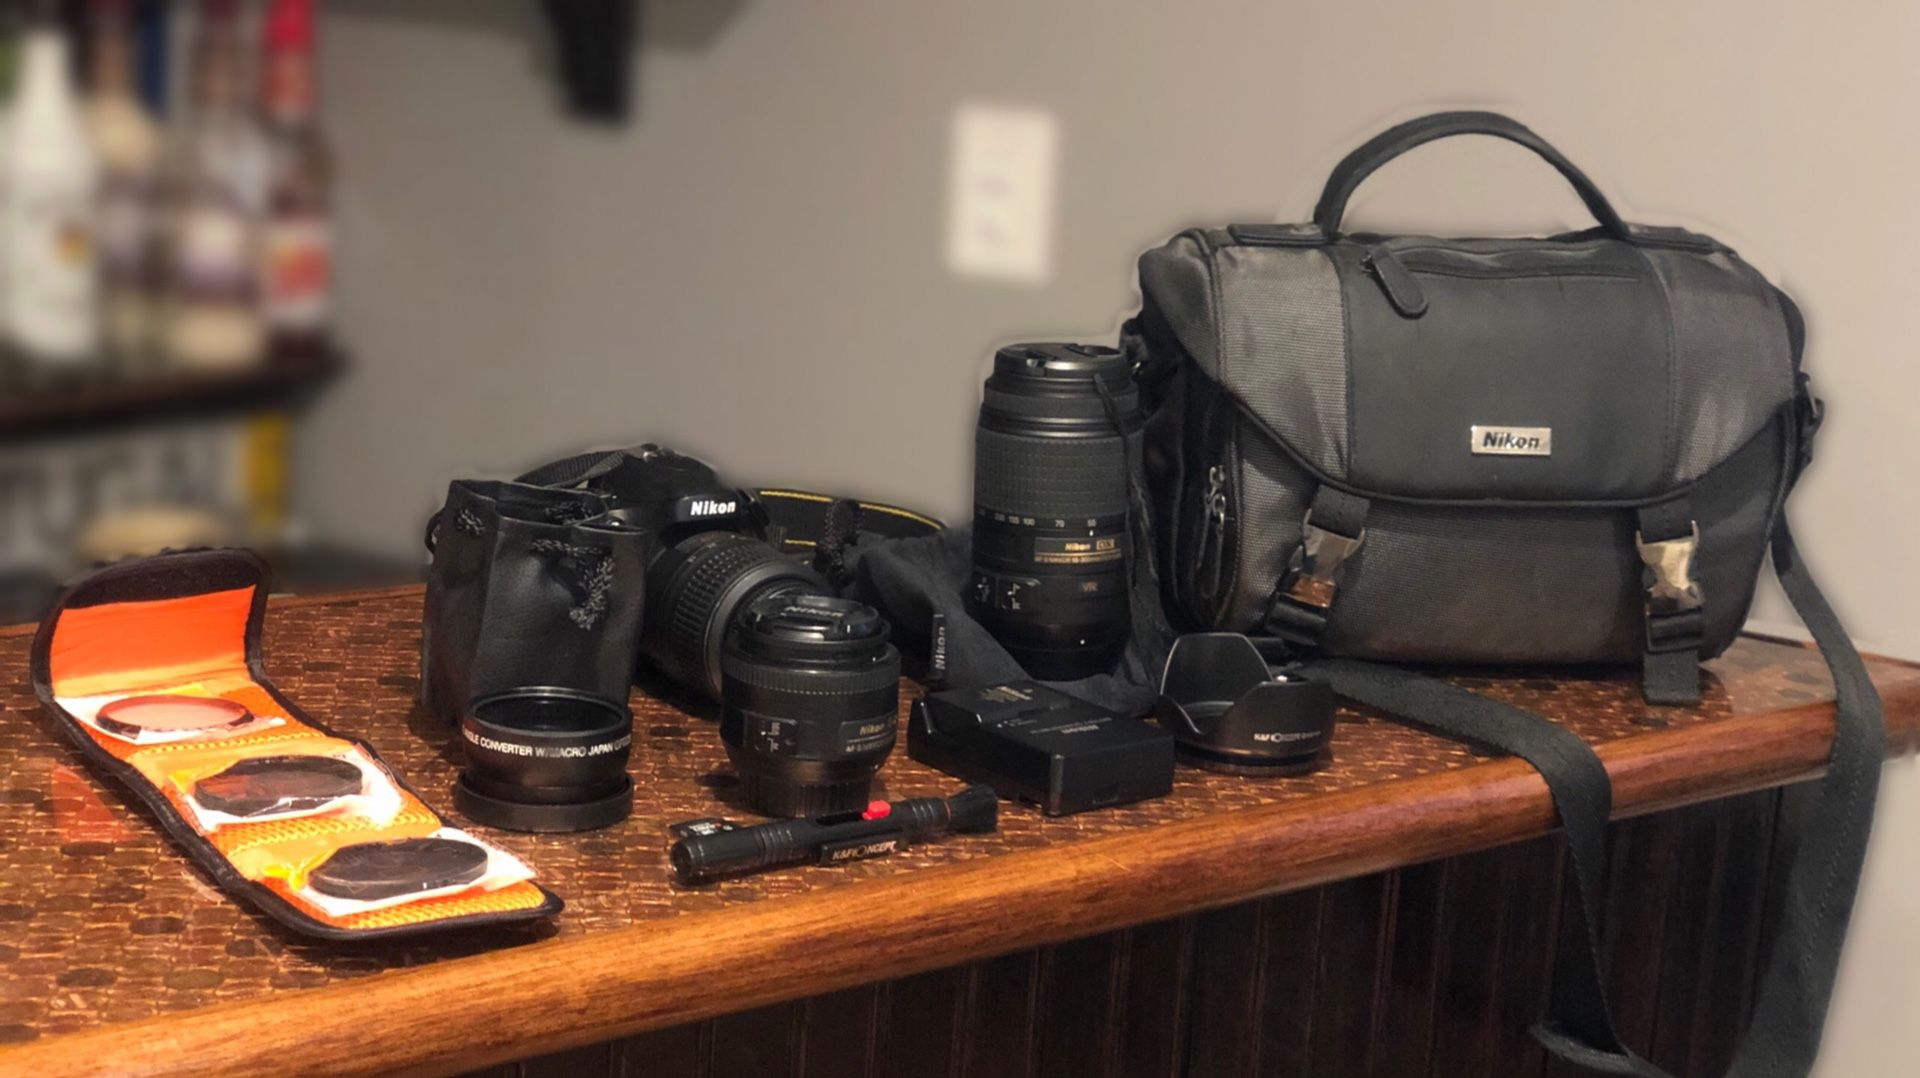 Nikon D5100 with 35mm, 18-55mm, and 55-300mm